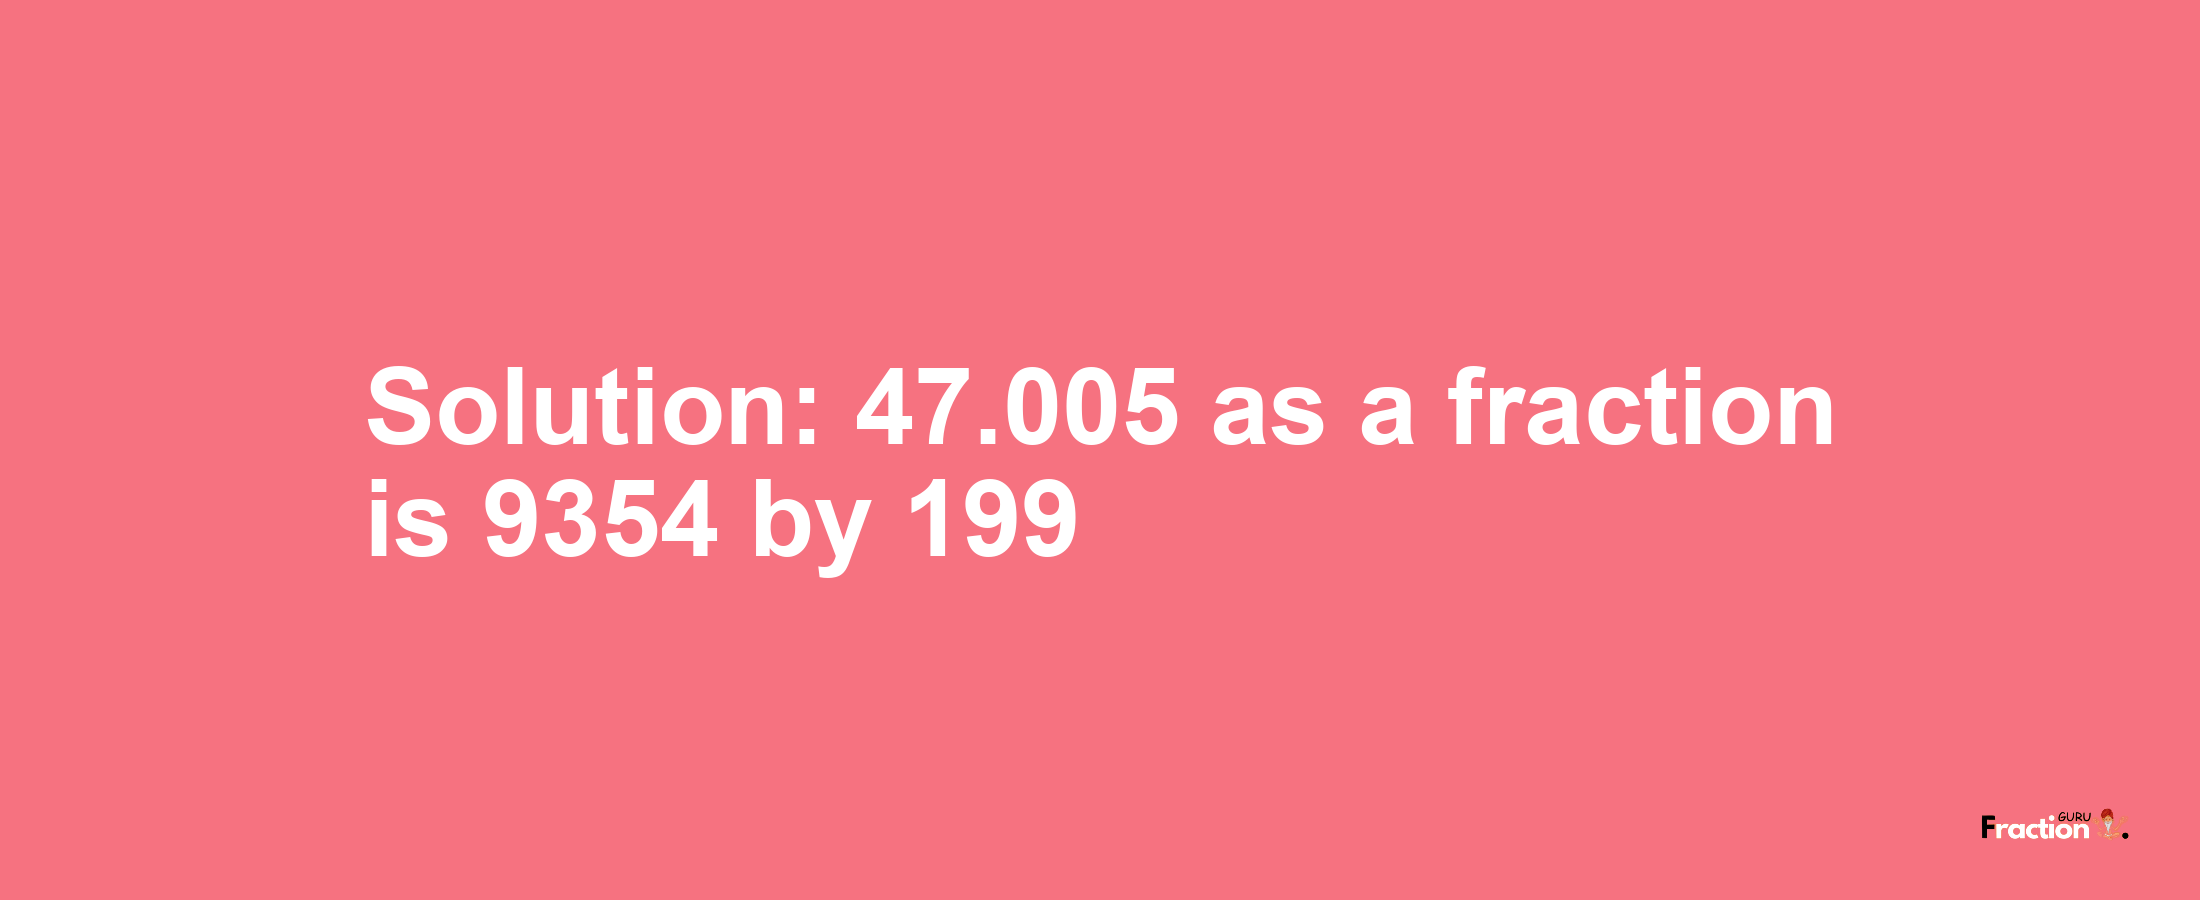 Solution:47.005 as a fraction is 9354/199